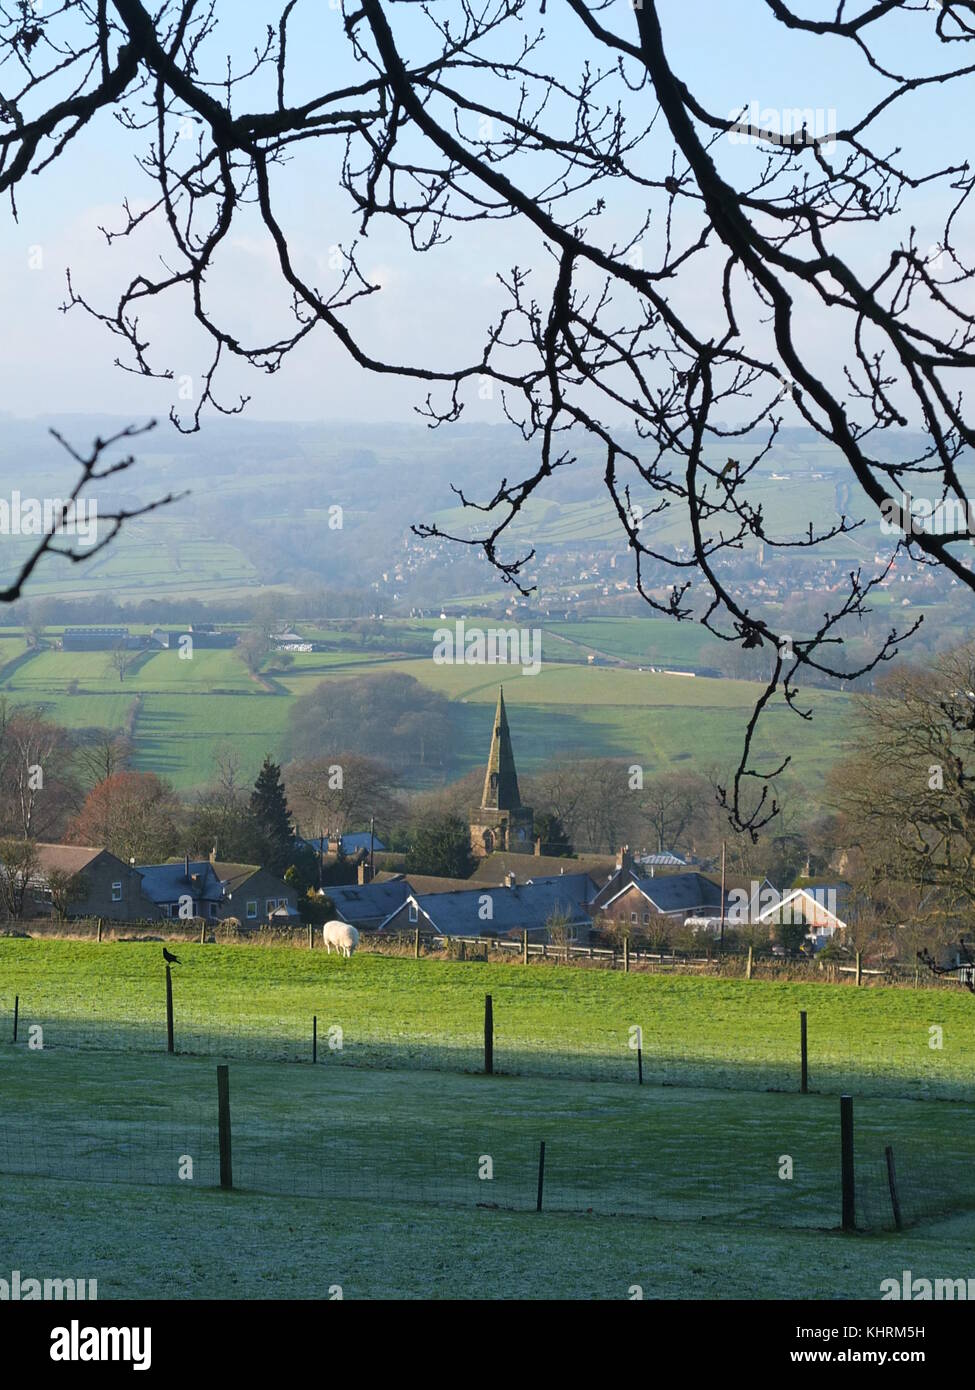 The church and village of Stanton in Peak and surrounding landscape in the Derbyshire Peak District on a frosty winter's day Stock Photo